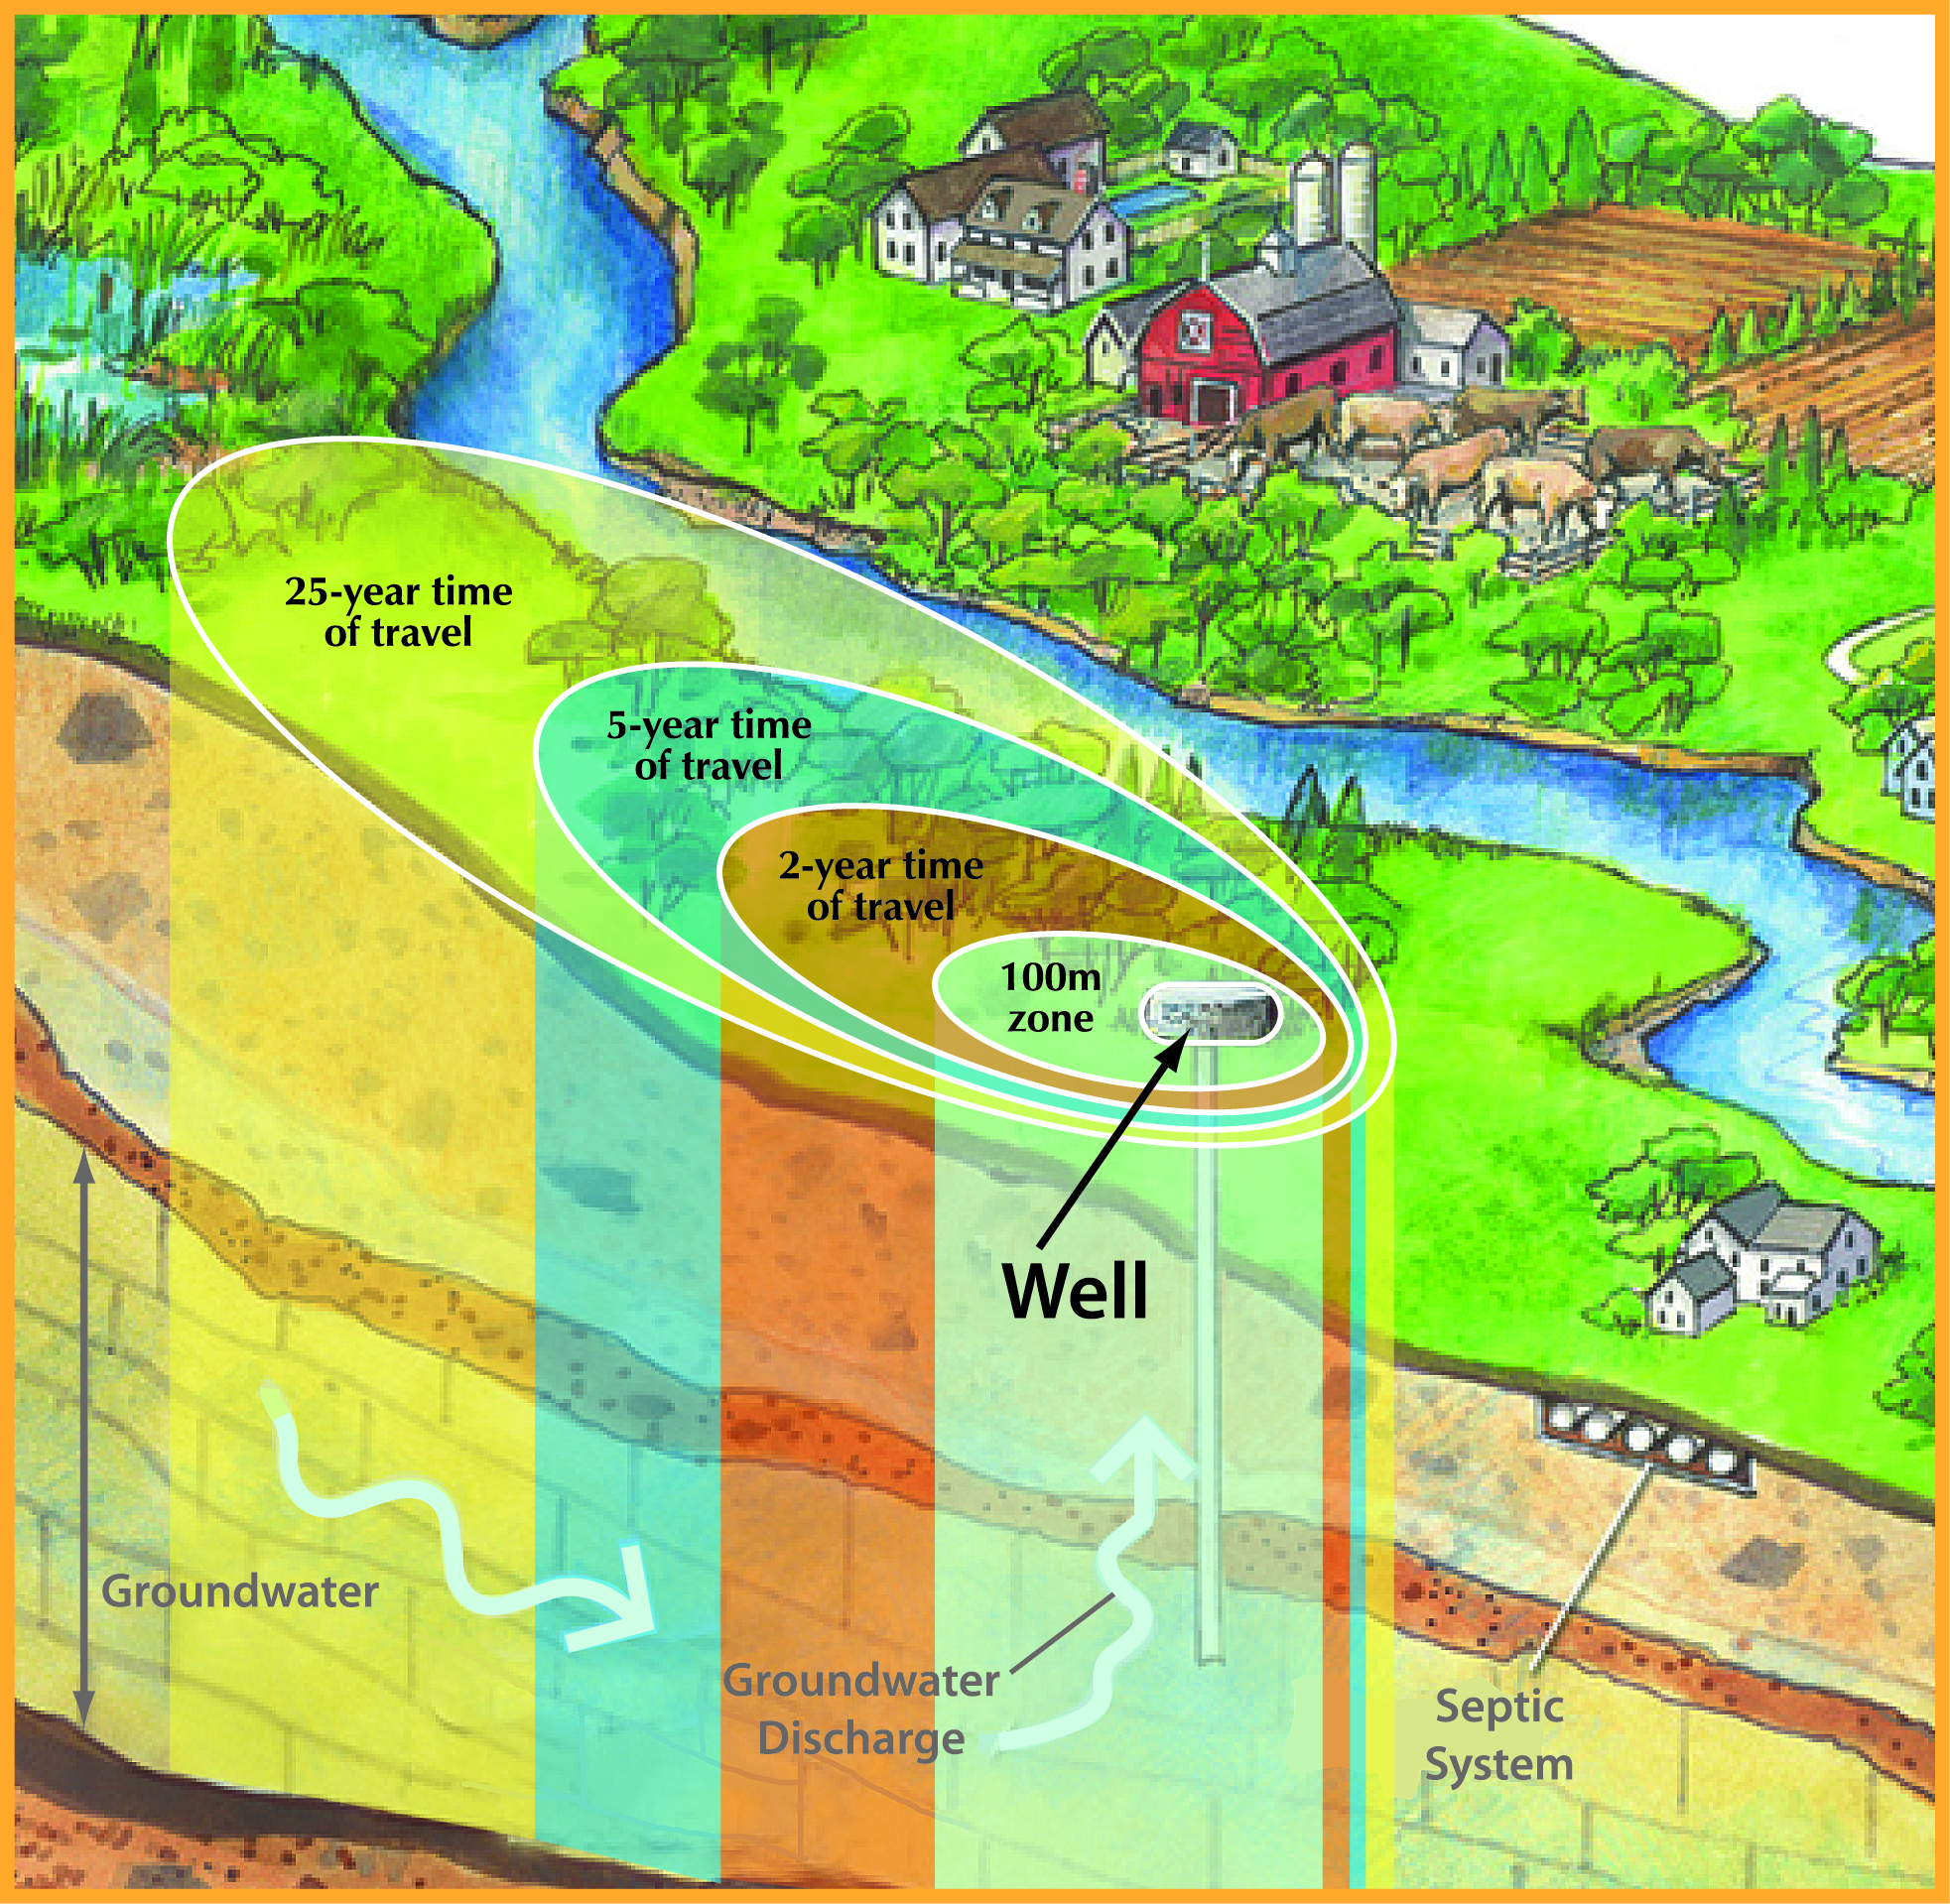 The amount of land involved in a wellhead protection area is determined by a variety of factors such as the way the land rises or falls, the amount of water being pumped, the type of aquifer, the type of soil surrounding the well, and the direction and speed that groundwater travels. All of these factors help to determine how long it takes water to move underground to the well itself and how much land around the wellhead should be protected. 